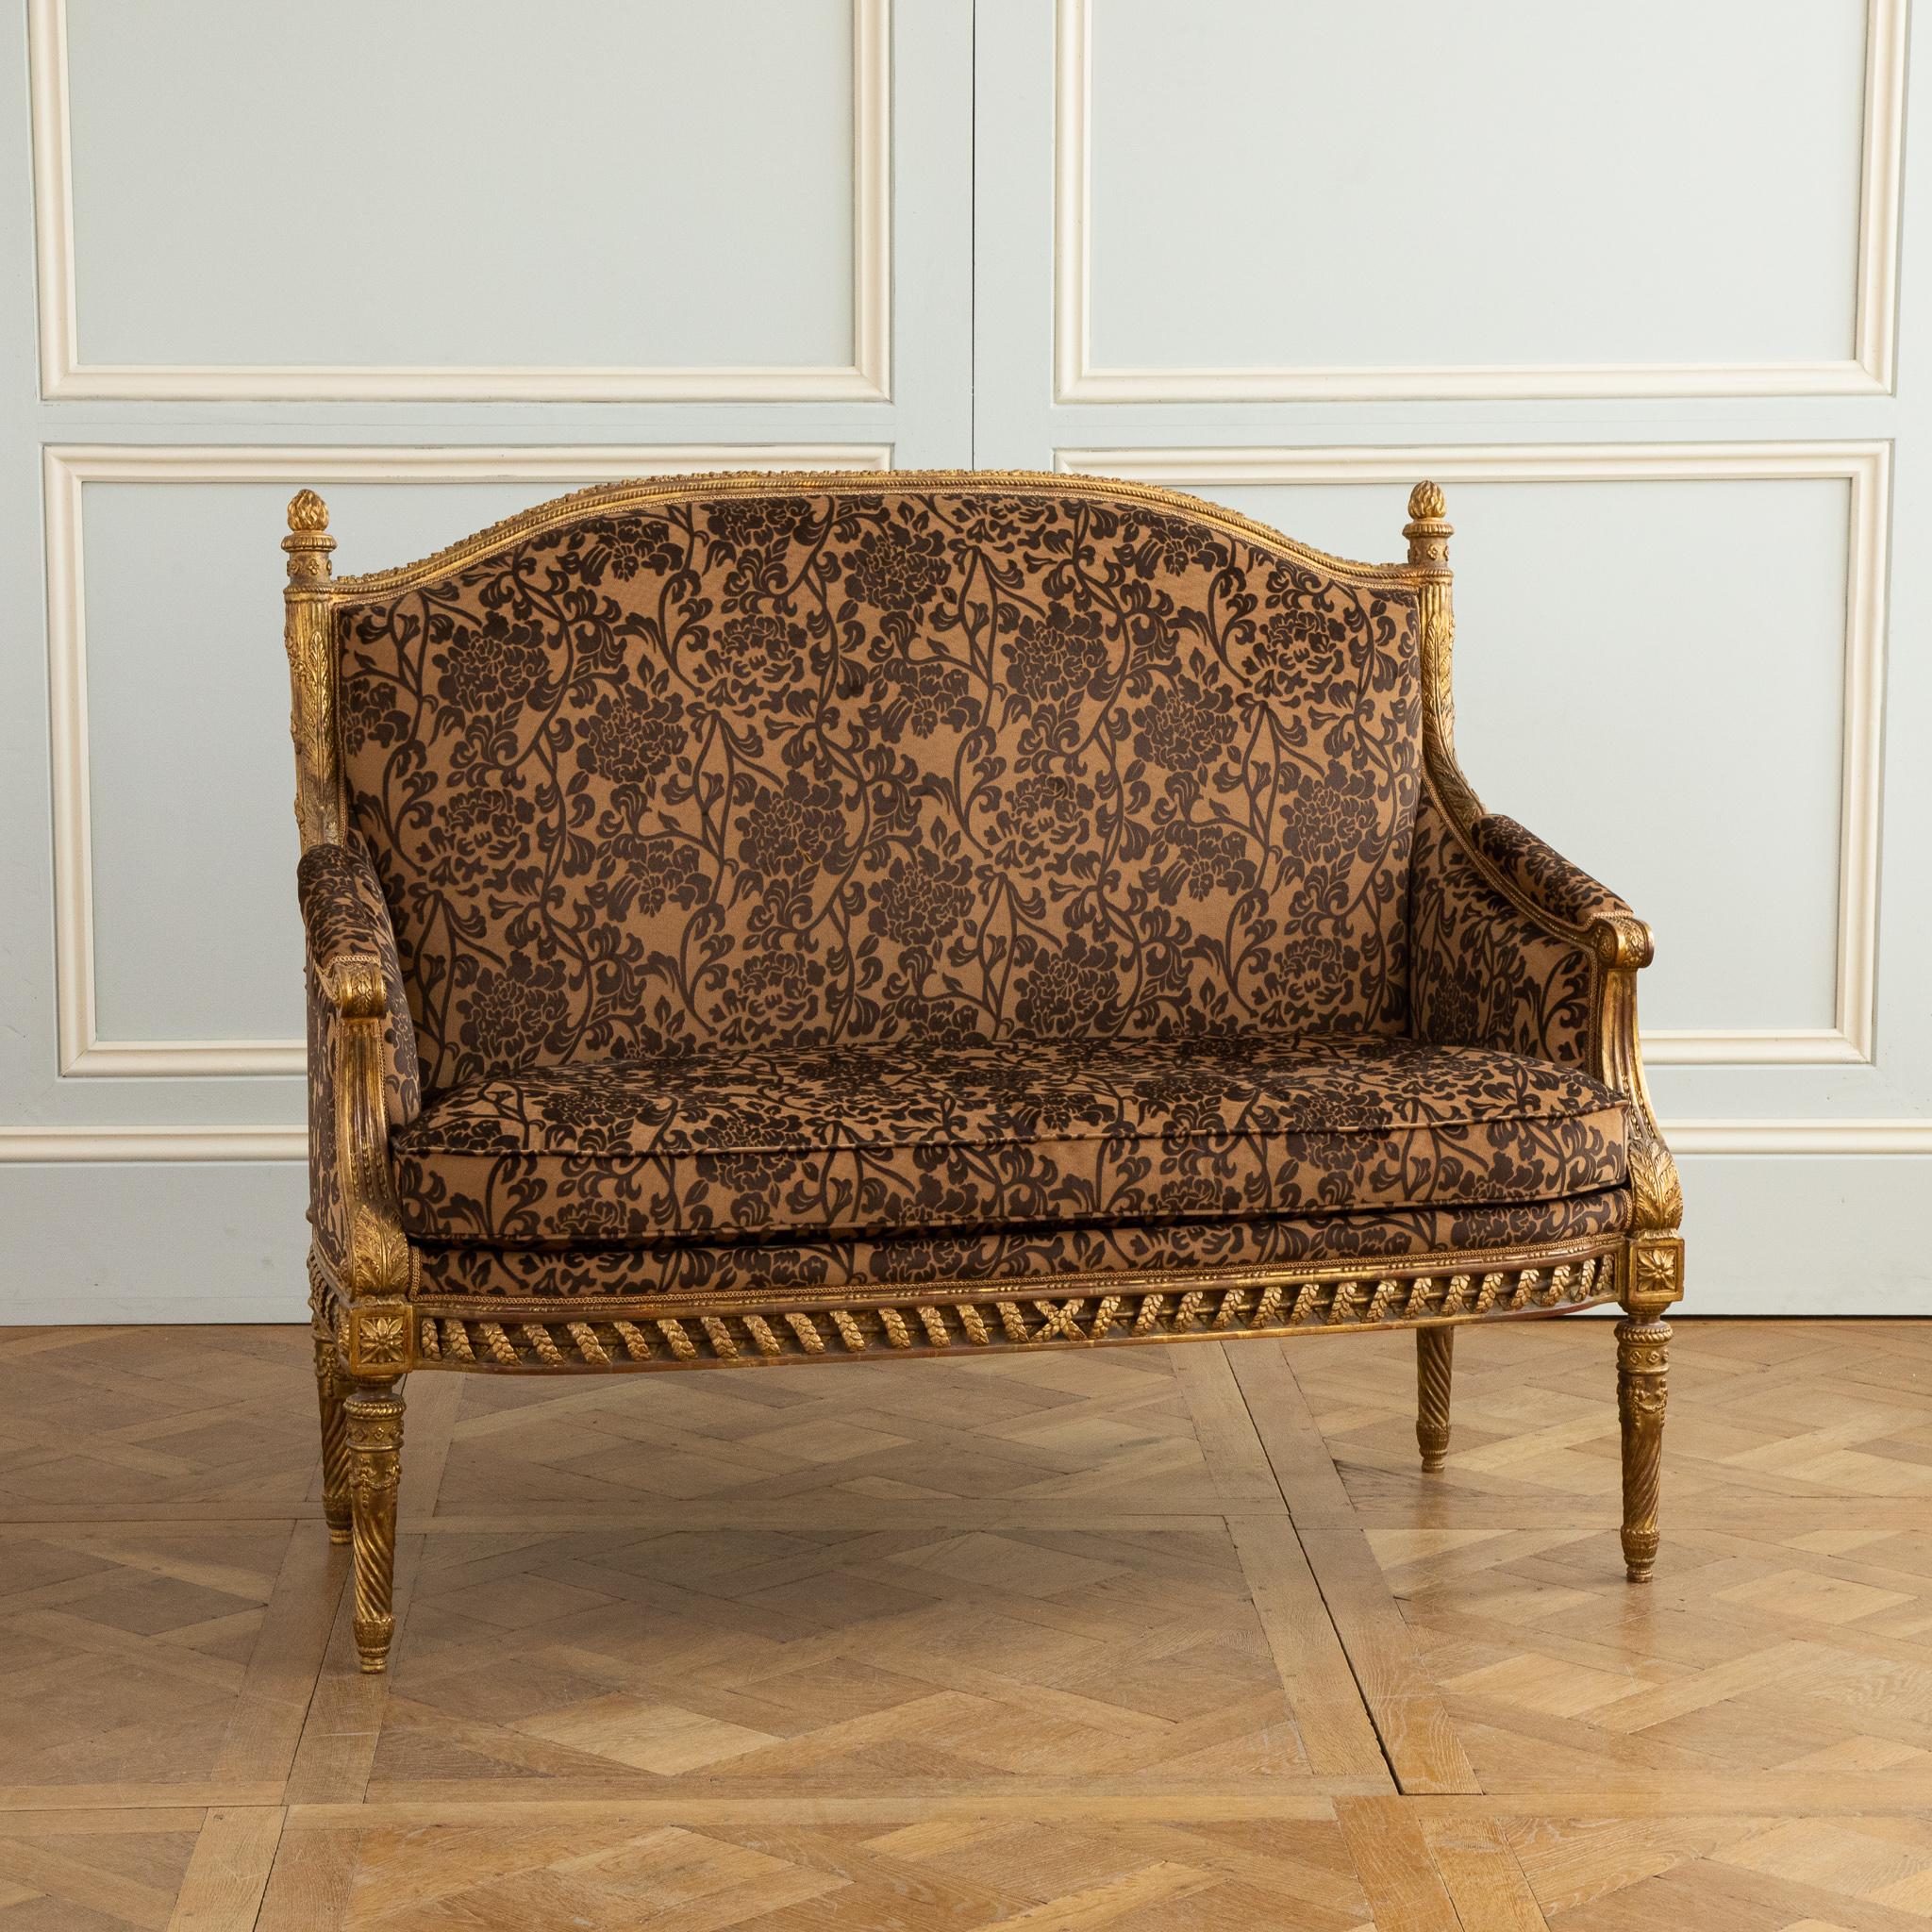 British  A Finely Carved  Louis XVI Style Giltwood Sofa For Sale